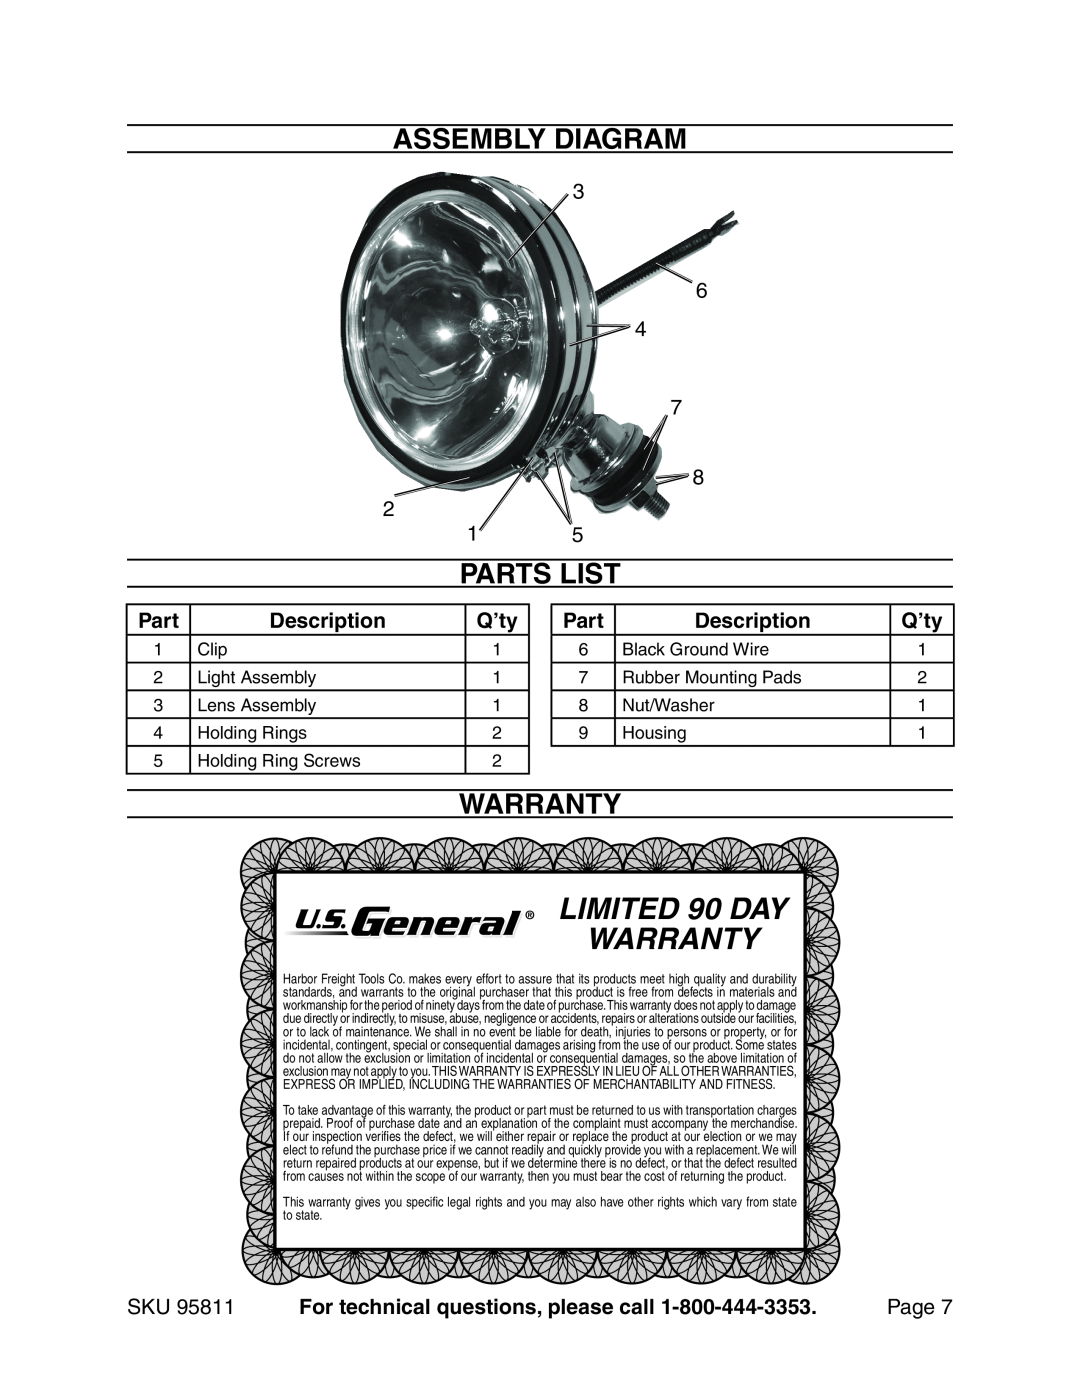 Harbor Freight Tools 95811 manual Assembly Diagram, Parts List, Warranty, Description, Q’ty, Limited 90 Day warranty, Page 